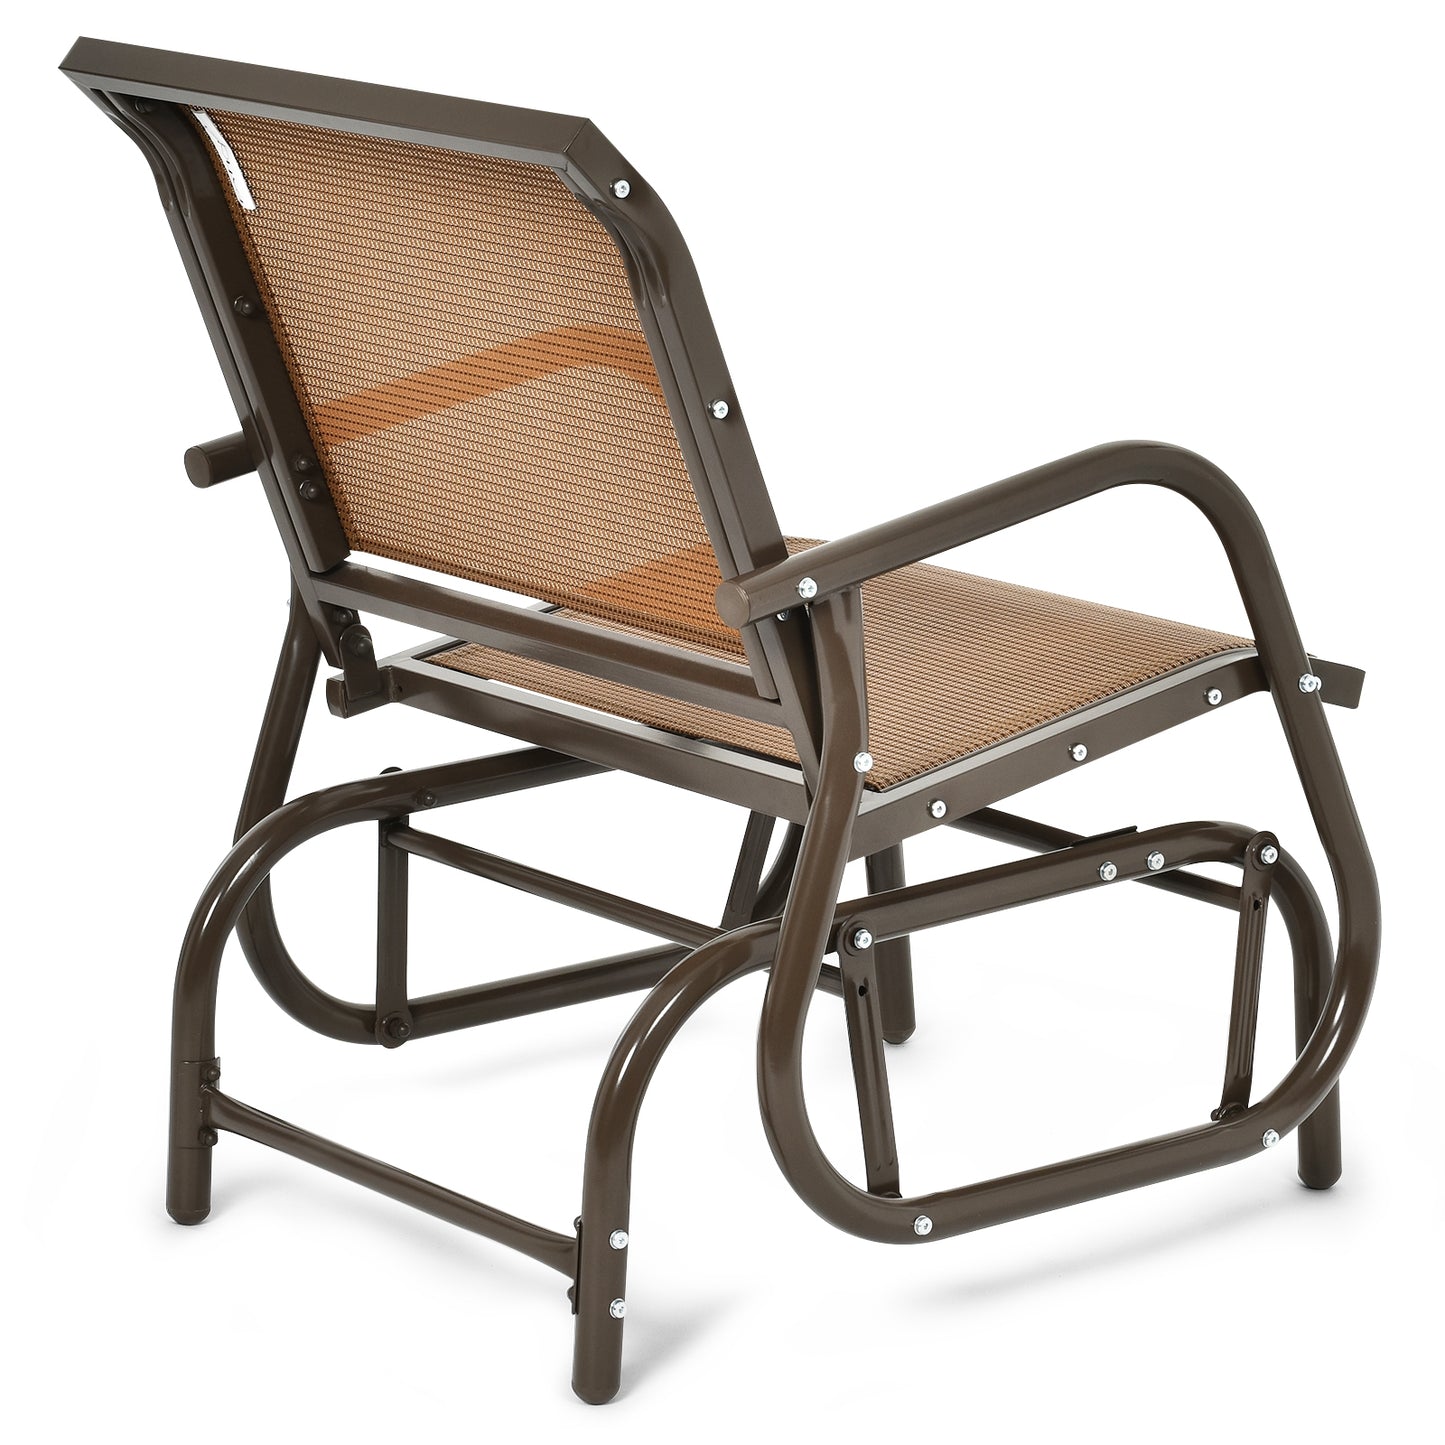 Outdoor Single Swing Glider Rocking Chair with Armrest-Brown